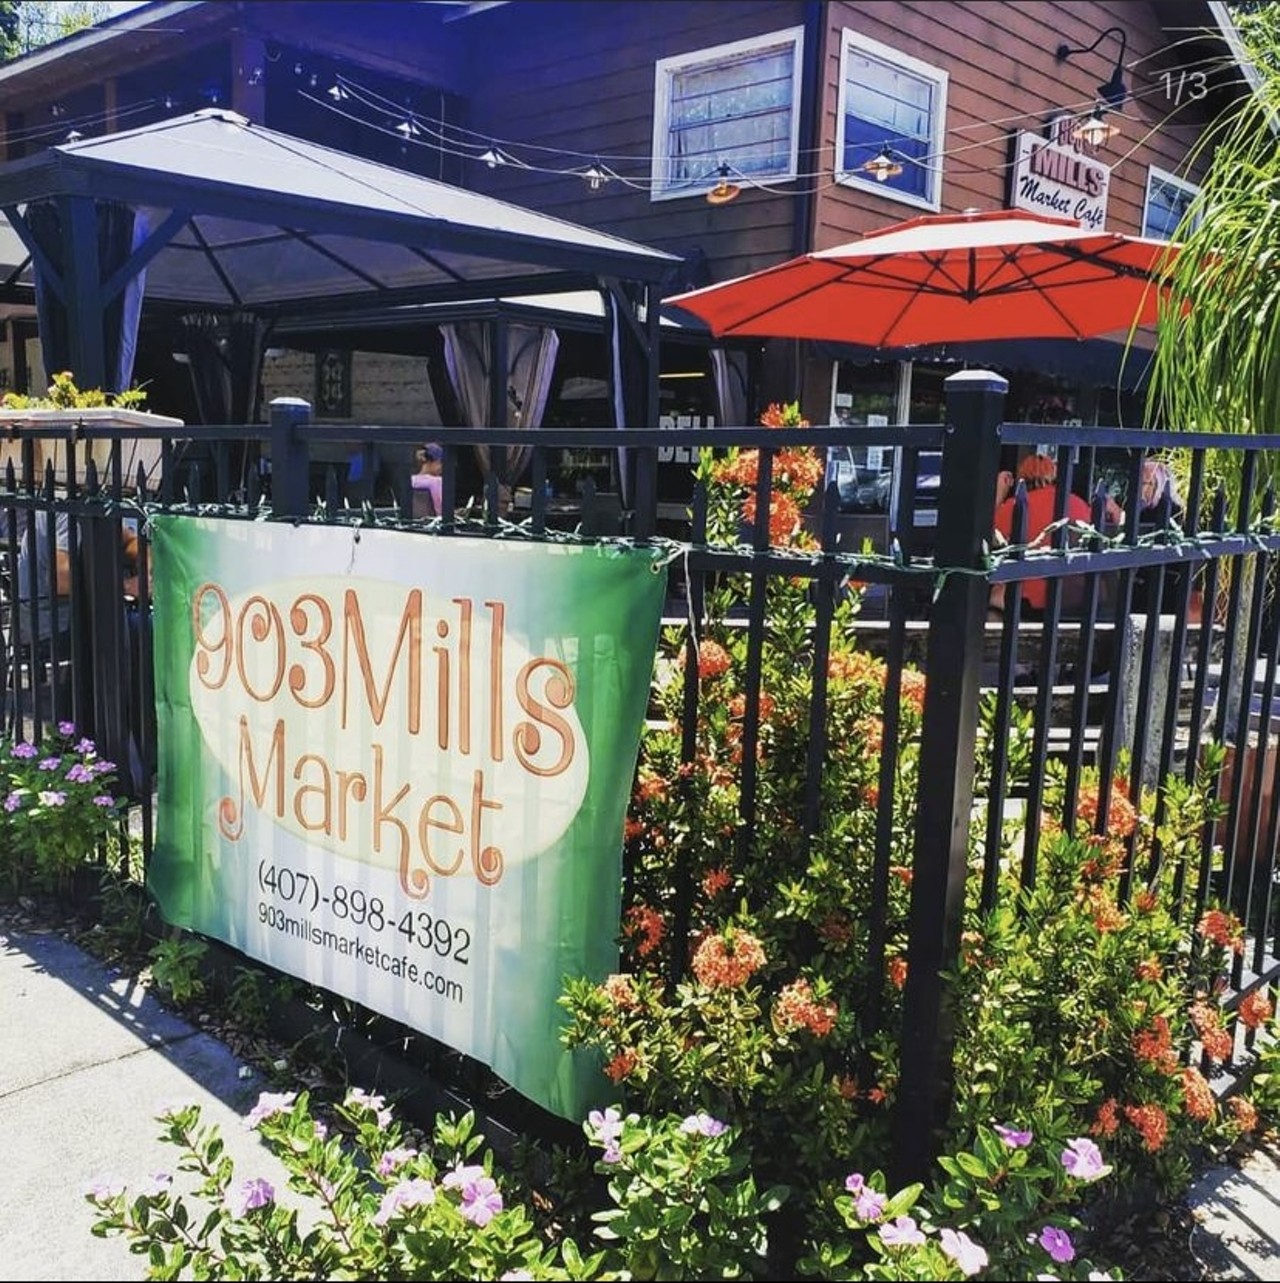 903 Mills Market 
903 South Mills Ave, Orlando, FL, 32806, (407) 898-4392
Enjoy a home cooked meal with your family in a restaurant that feels like home. They offer complementary water bowls for your doggies.
Photo via 903 Mills Market/Instagram